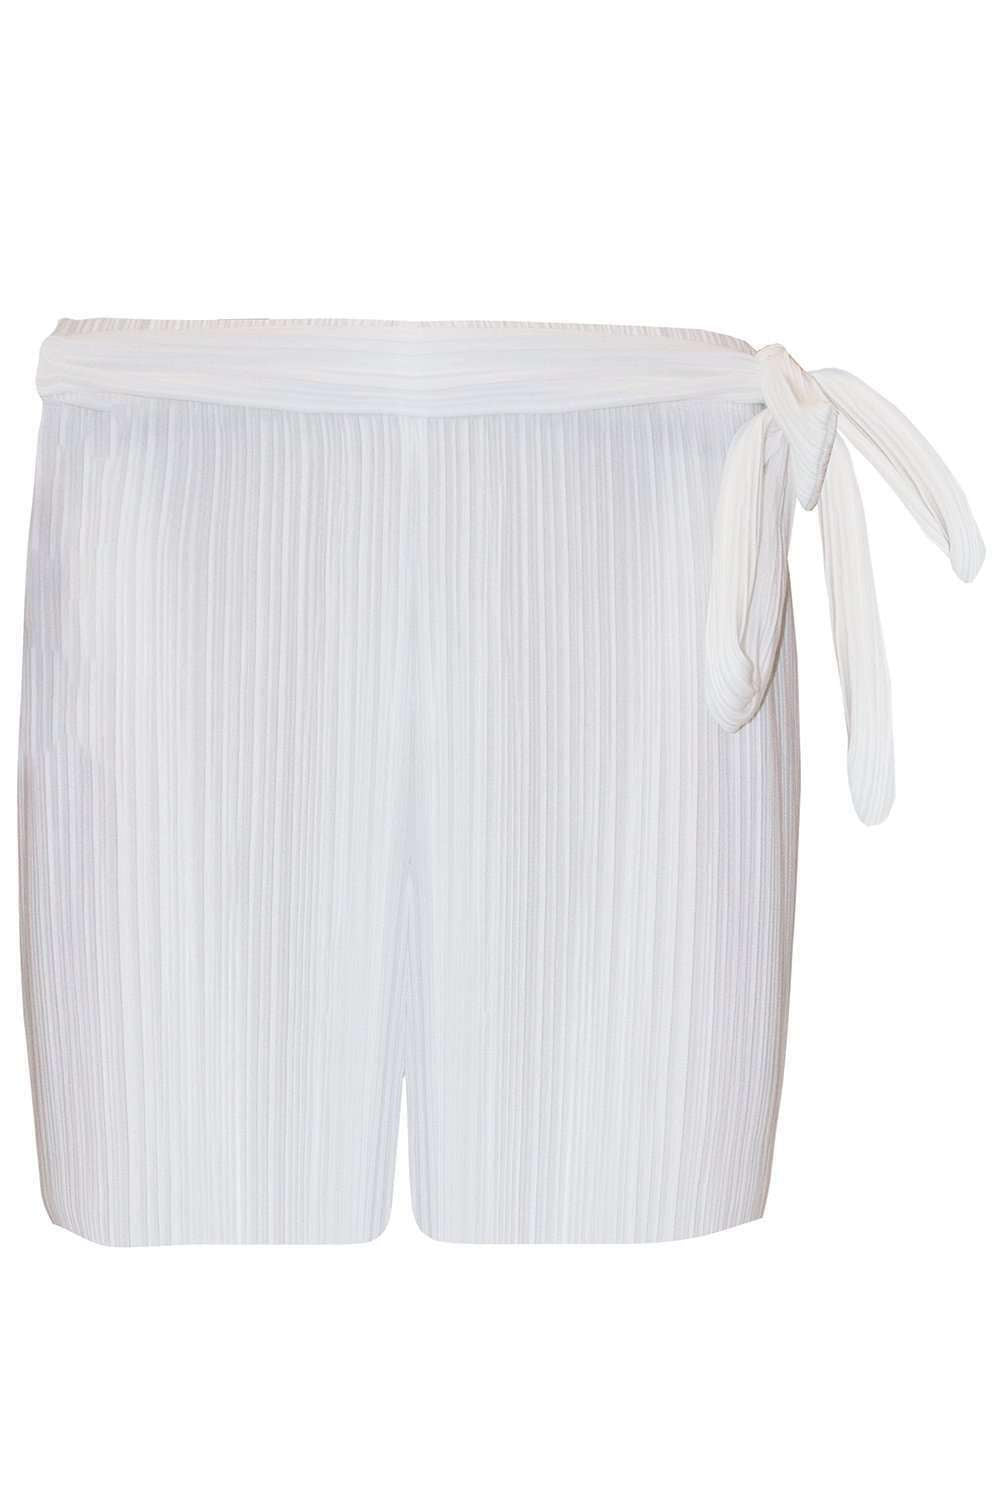 Pastel Pink High Waisted Belted Pleated Shorts - bejealous-com